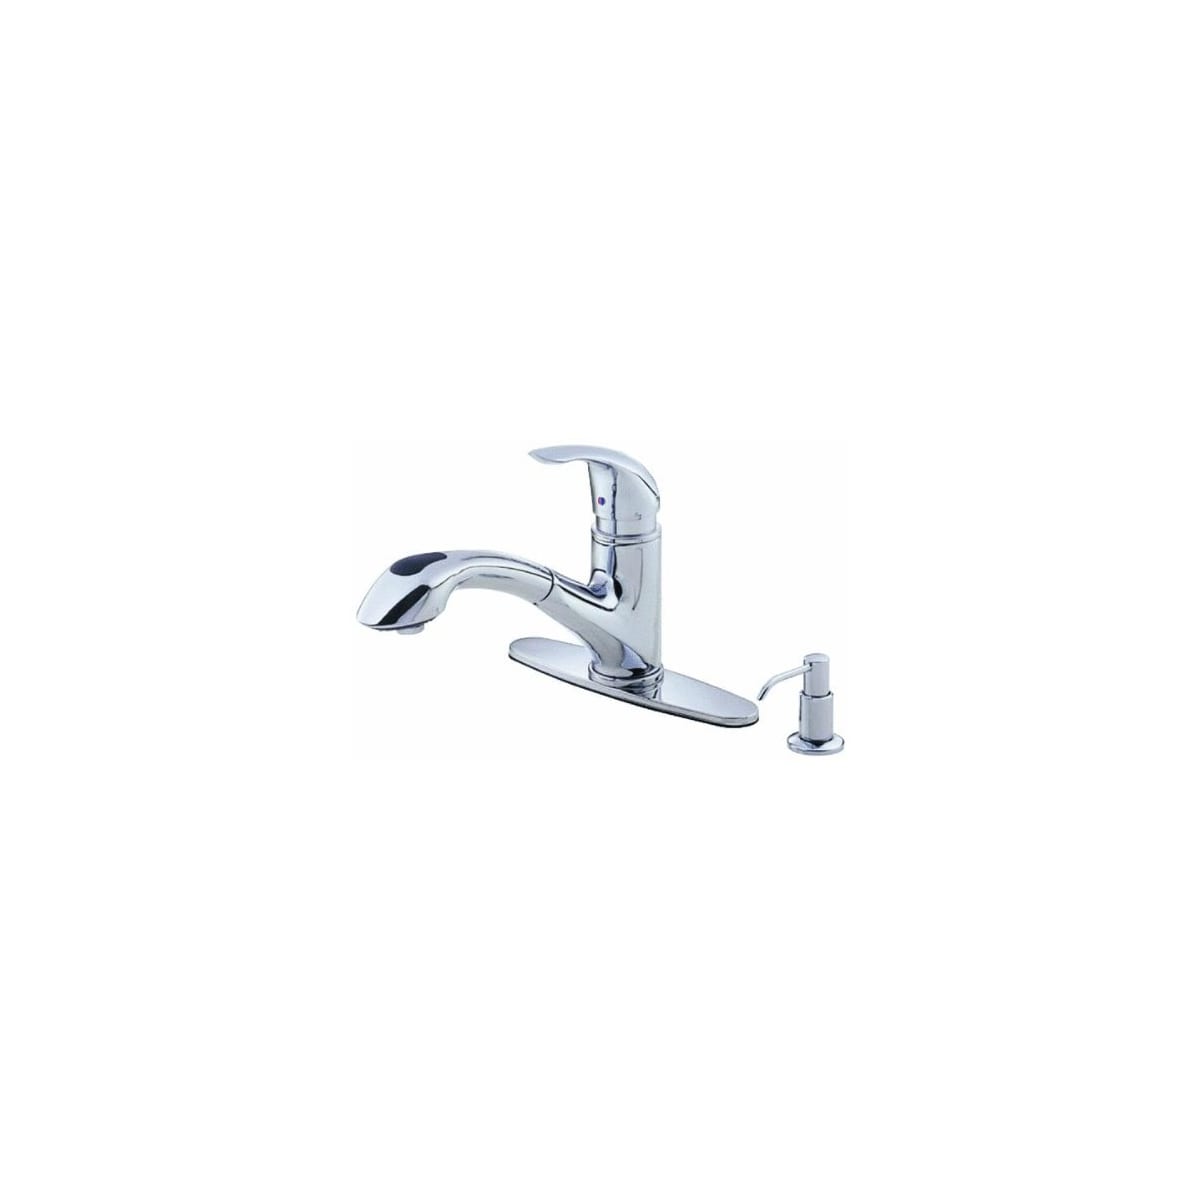 Danze D454612ss Stainless Steel Pullout Spray Kitchen Faucet